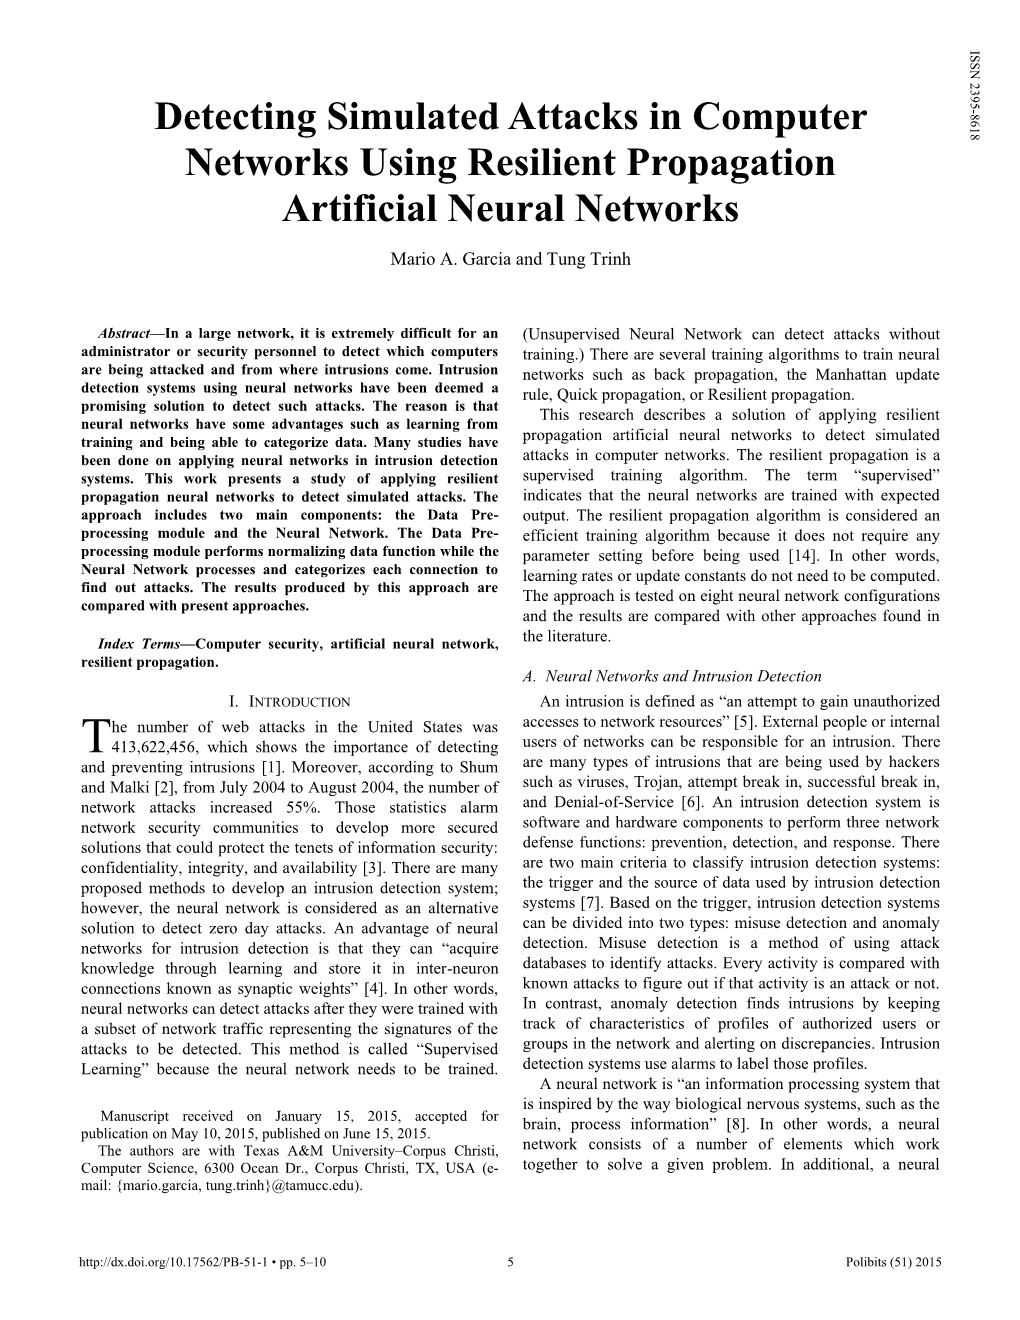 Detecting Simulated Attacks in Computer Networks Using Resilient Propagation Artificial Neural Networks